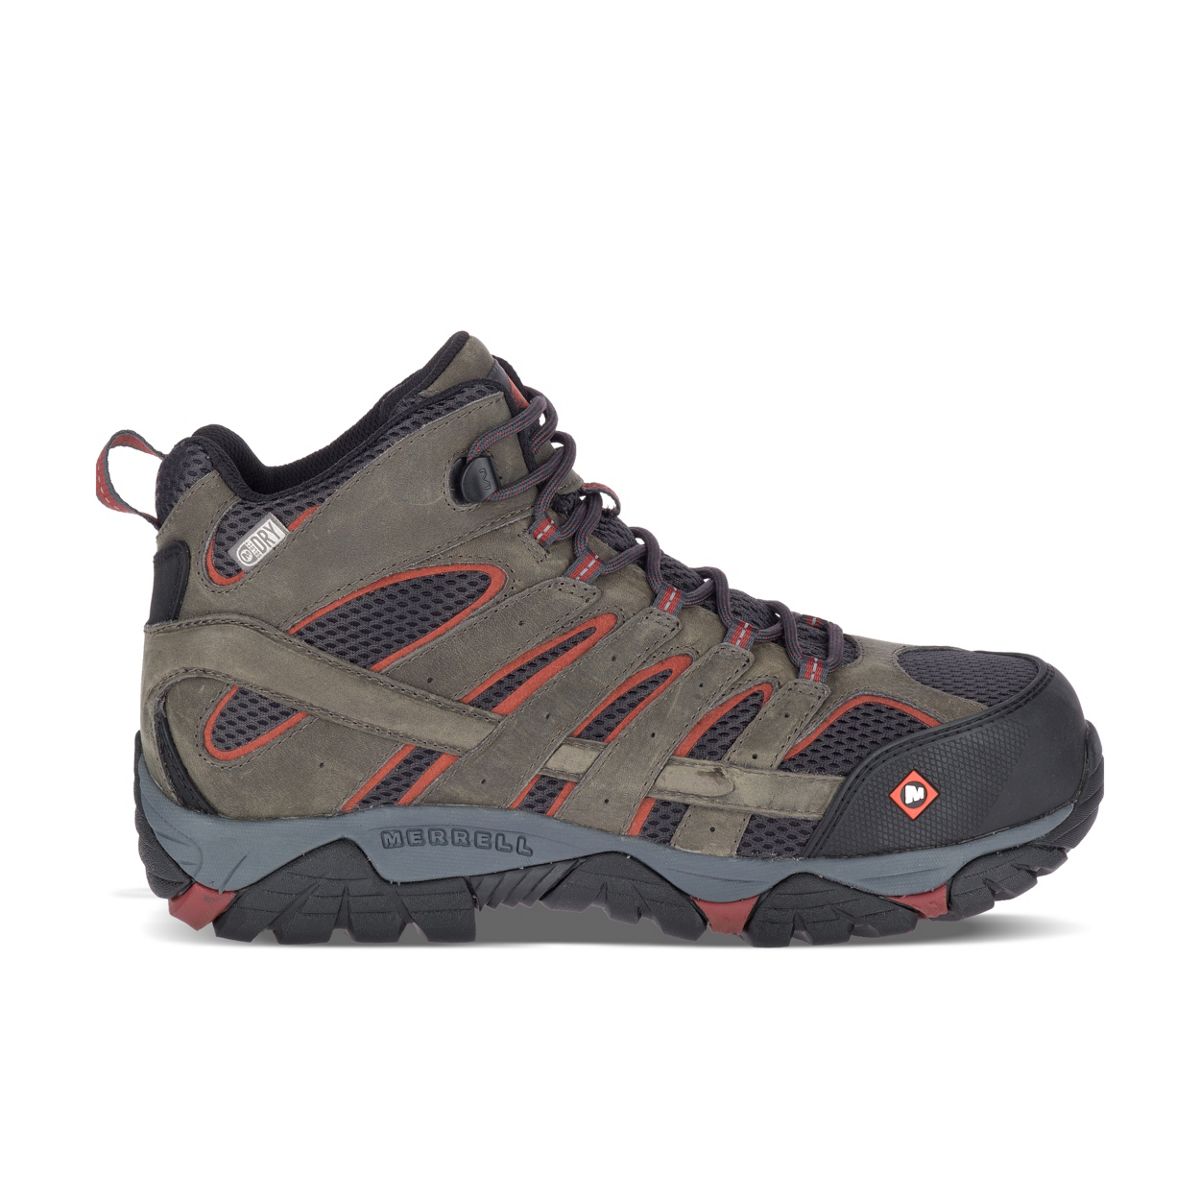 Men's Safety Toe Boots \u0026 Shoes | Merrell